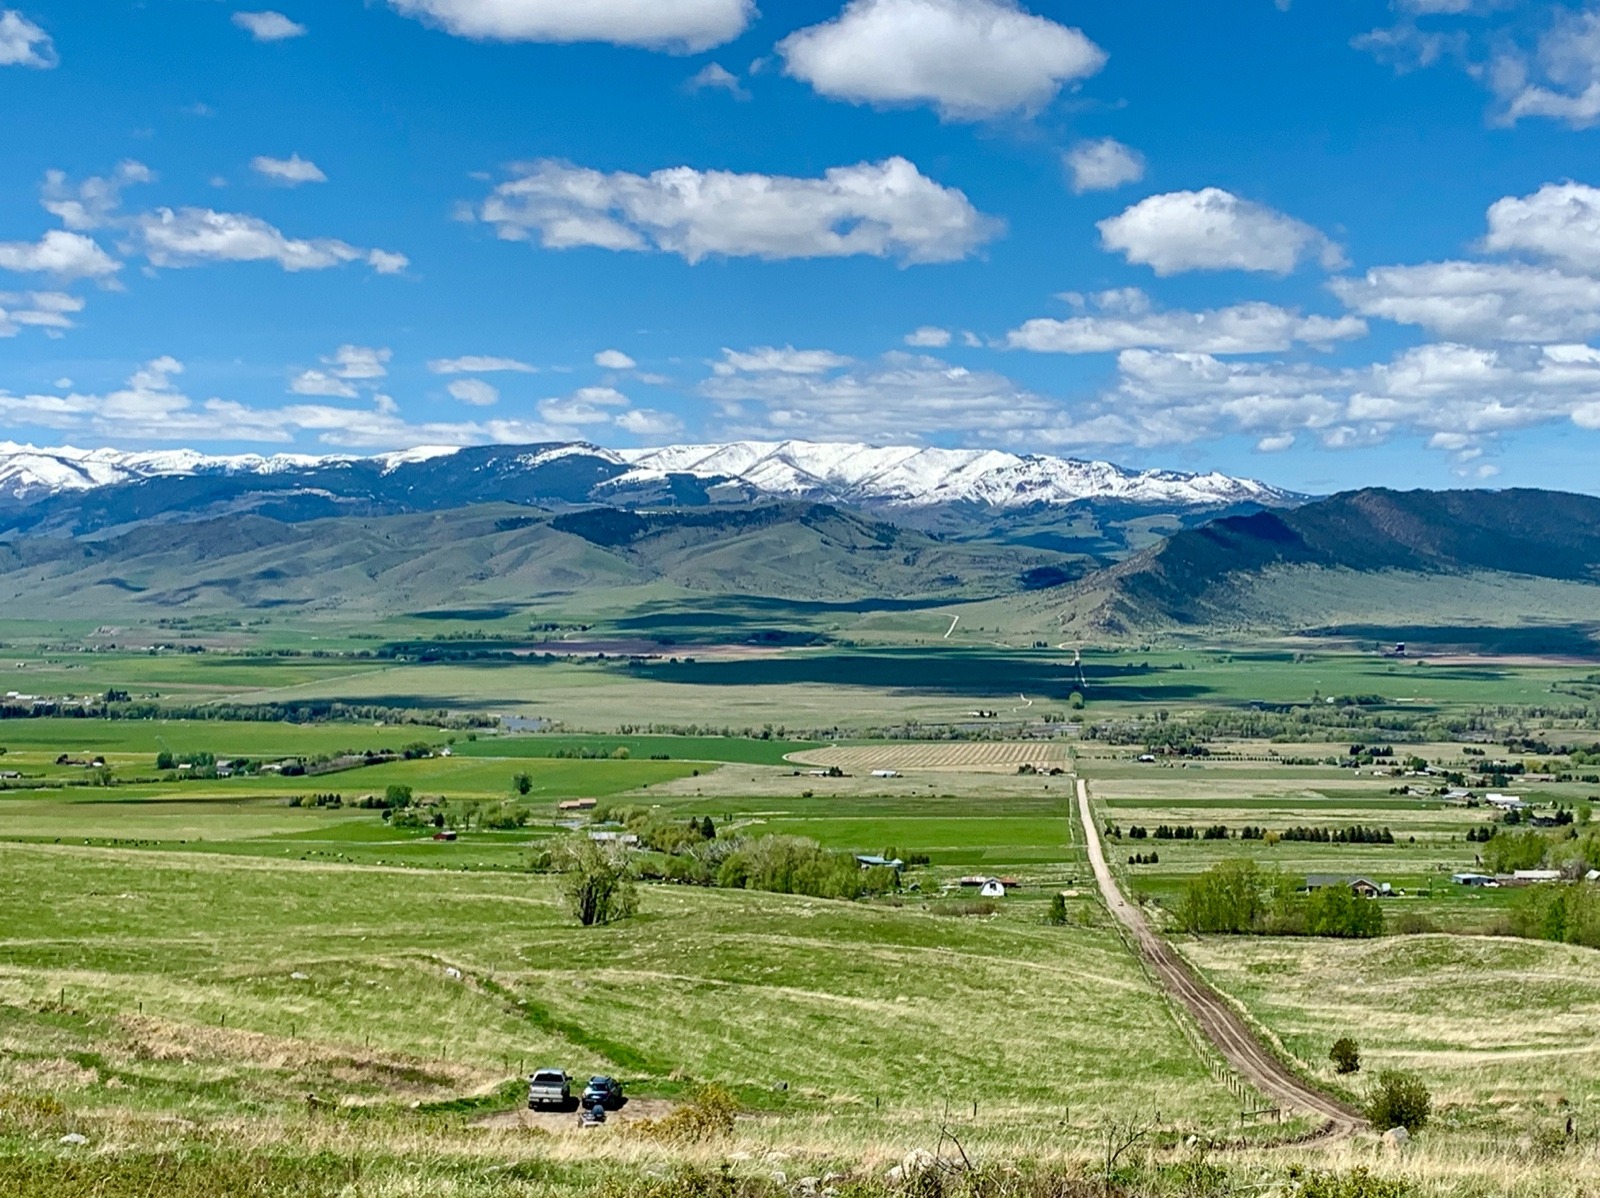 With its snow-covered ridgeline in the distance, the Gallatin Range rises above the western side of Paradise Valley and extends from the backyards of Bozeman and Livingston southward into Yellowstone National Park. As human impacts and presence grow on the other side of the Gallatins in Big Sky and as Paradise Valley fills in with more people and climate change brings hotter and drier conditions, the Gallatins will become even more important as a place of refuge for wildlife, scientists say. Photo by Todd Wilkinson